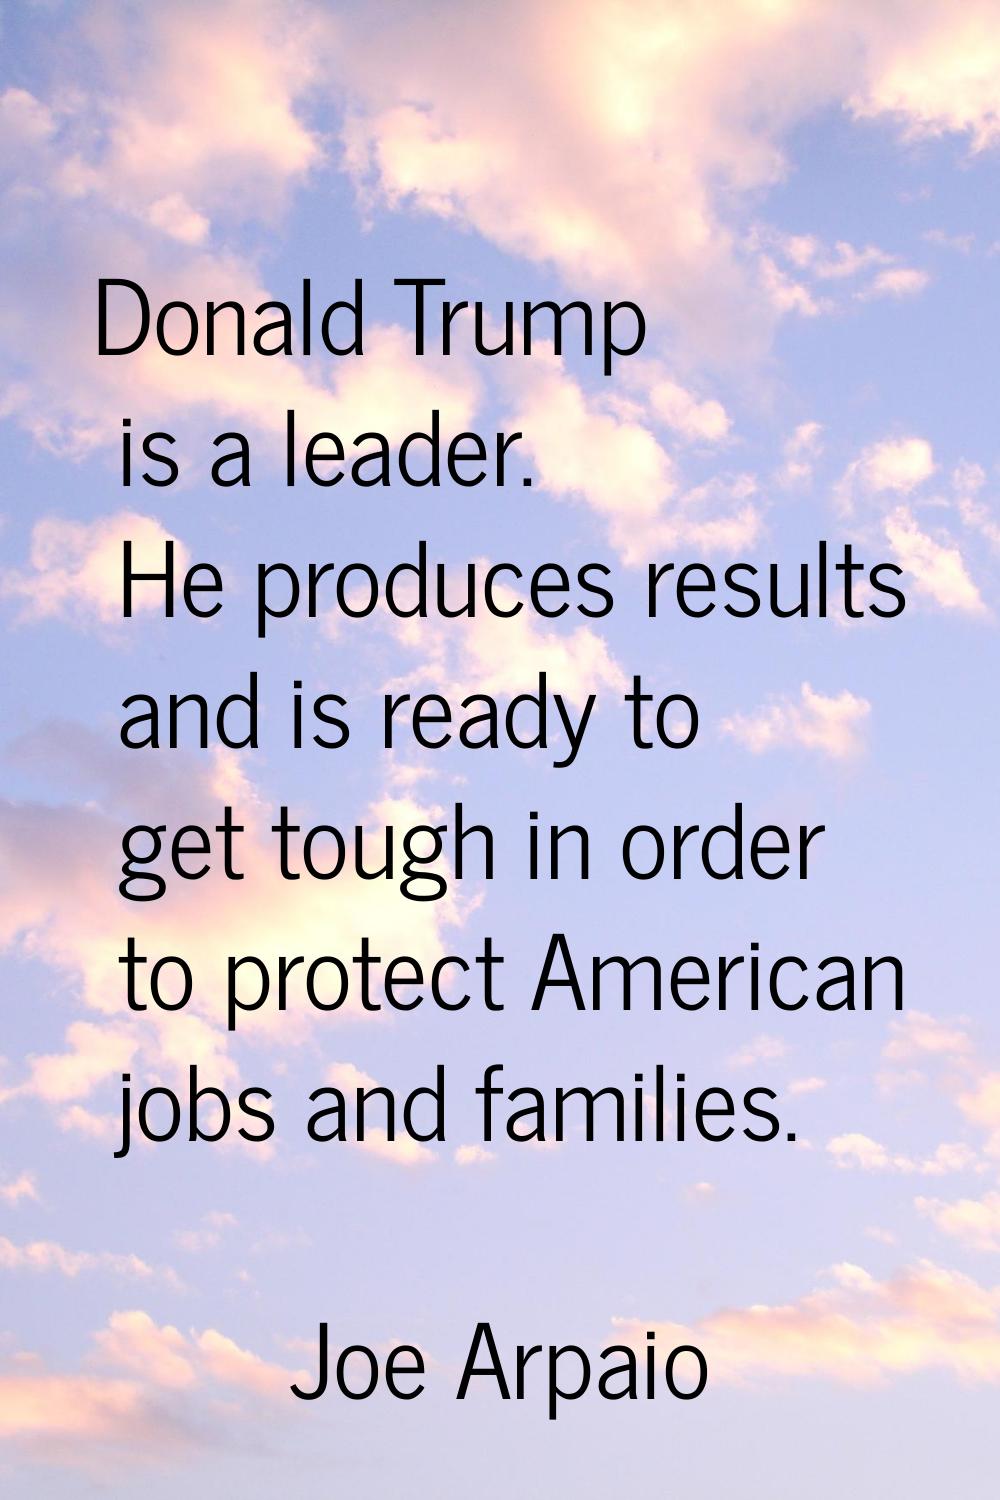 Donald Trump is a leader. He produces results and is ready to get tough in order to protect America